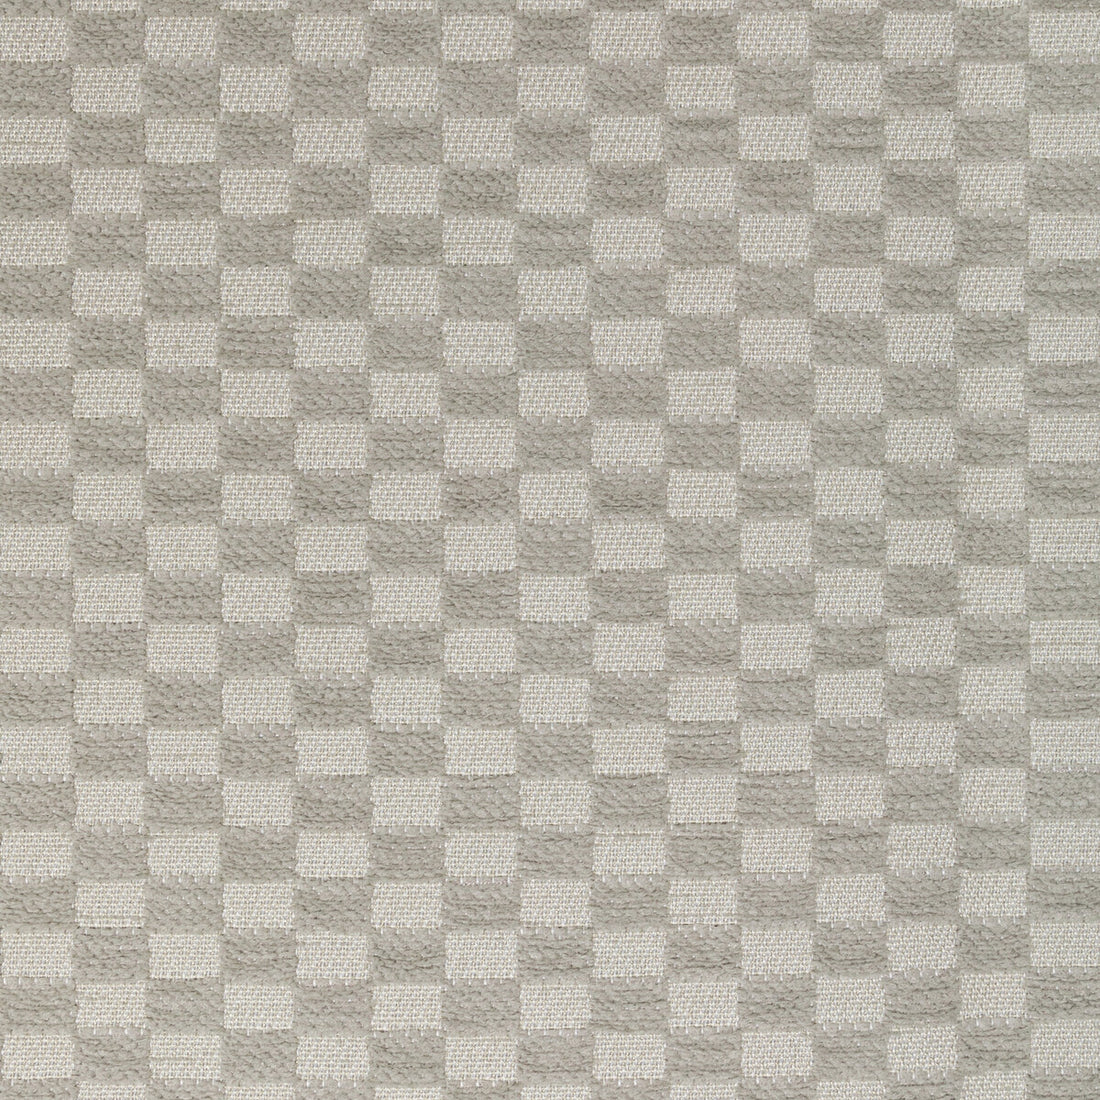 Reform fabric in sand dollar color - pattern 36567.106.0 - by Kravet Contract in the Seaqual collection